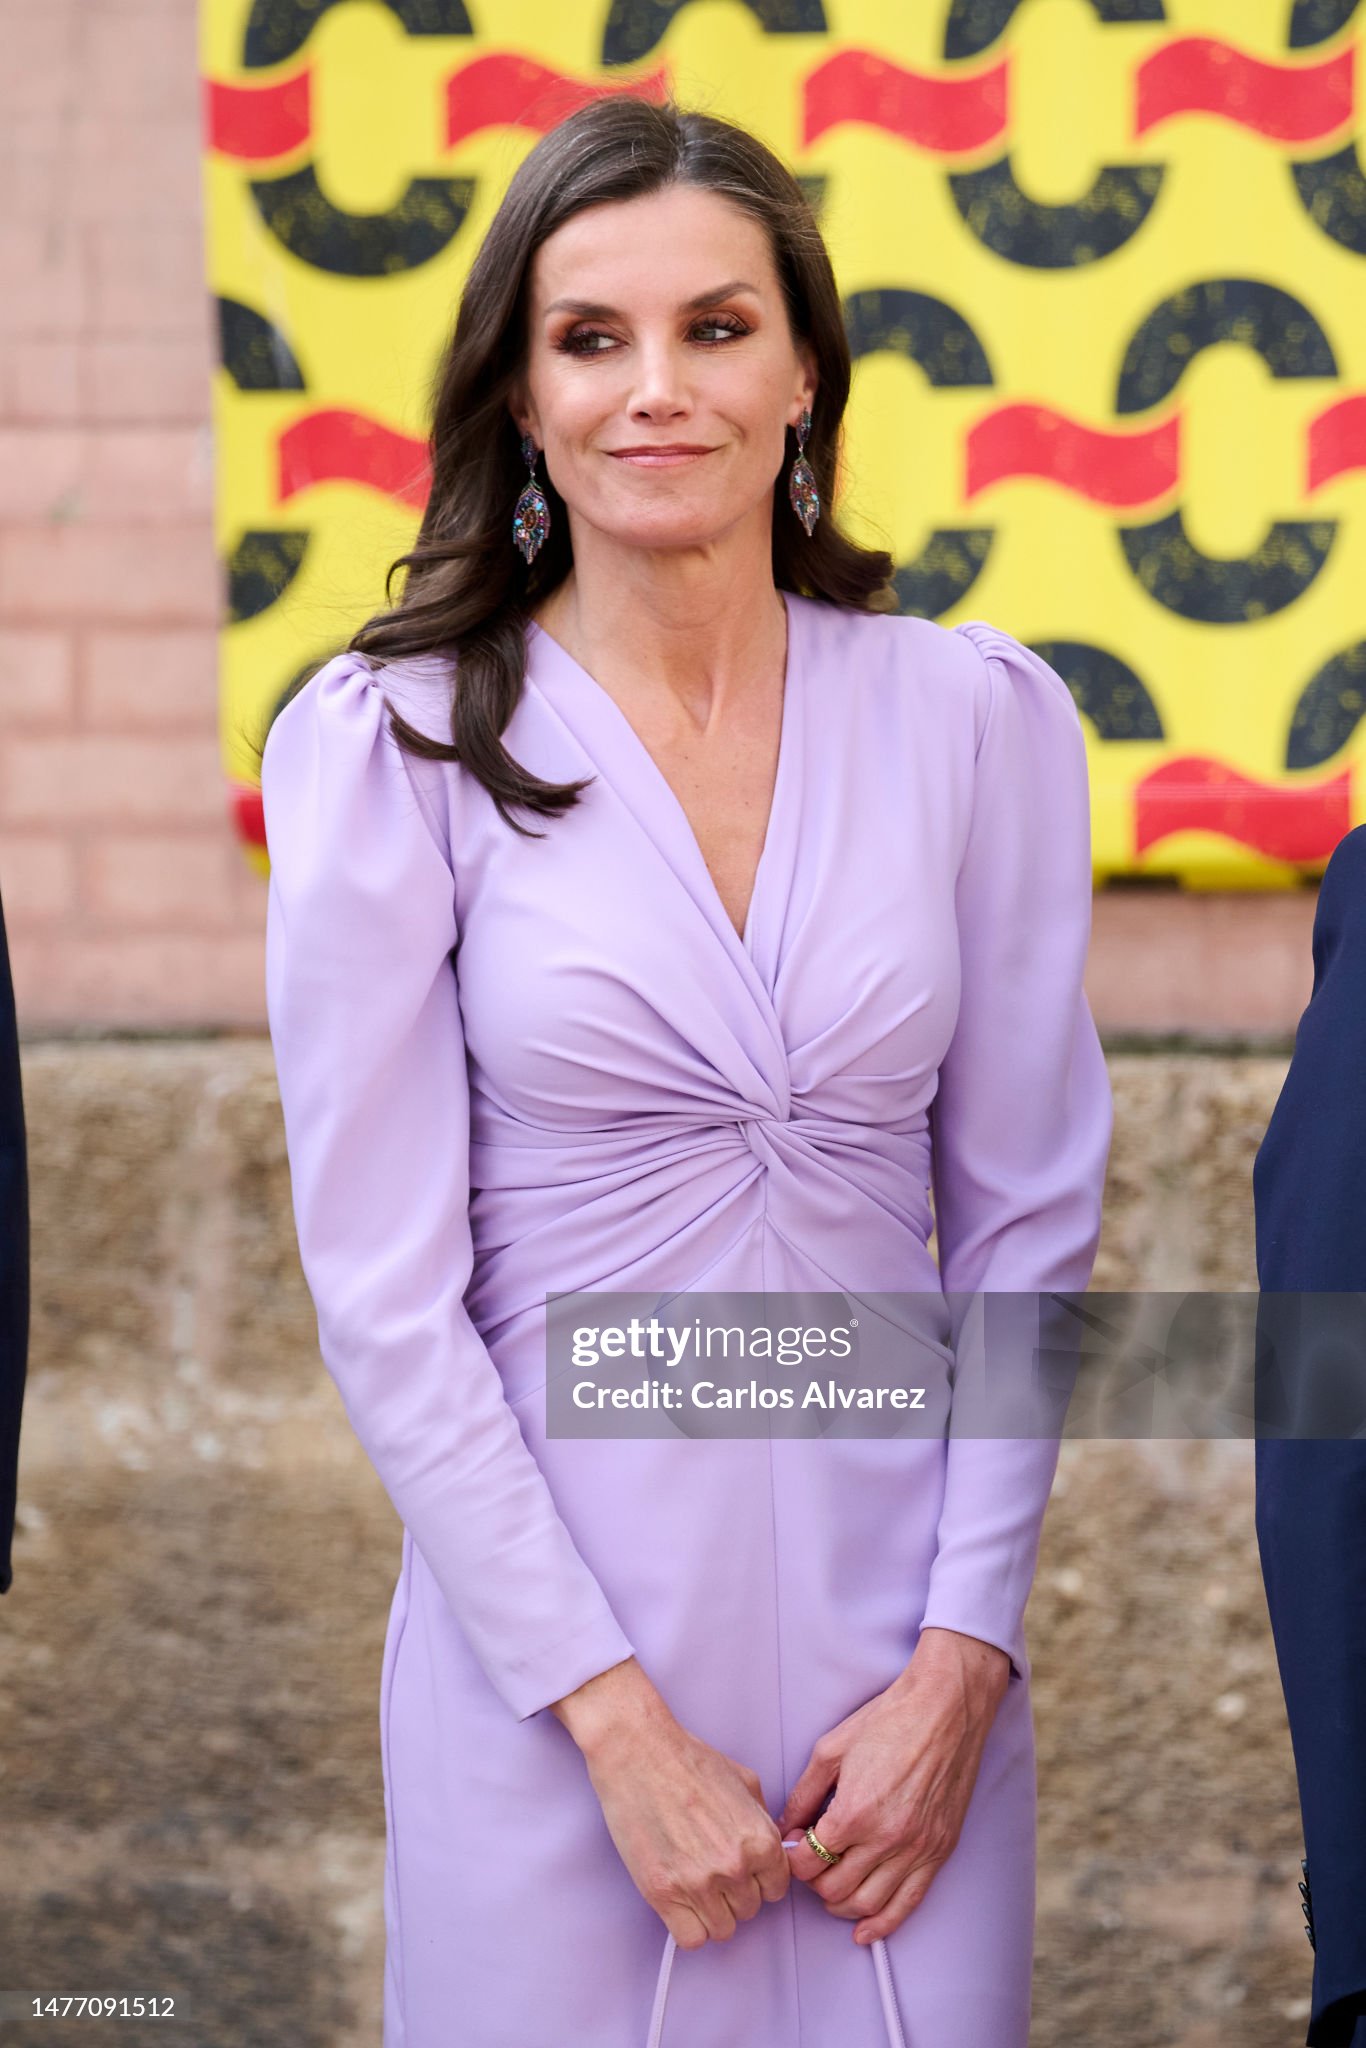 queen-letizia-of-spain-attends-the-ix-international-congress-of-the-spanish-language-at-the.jpg